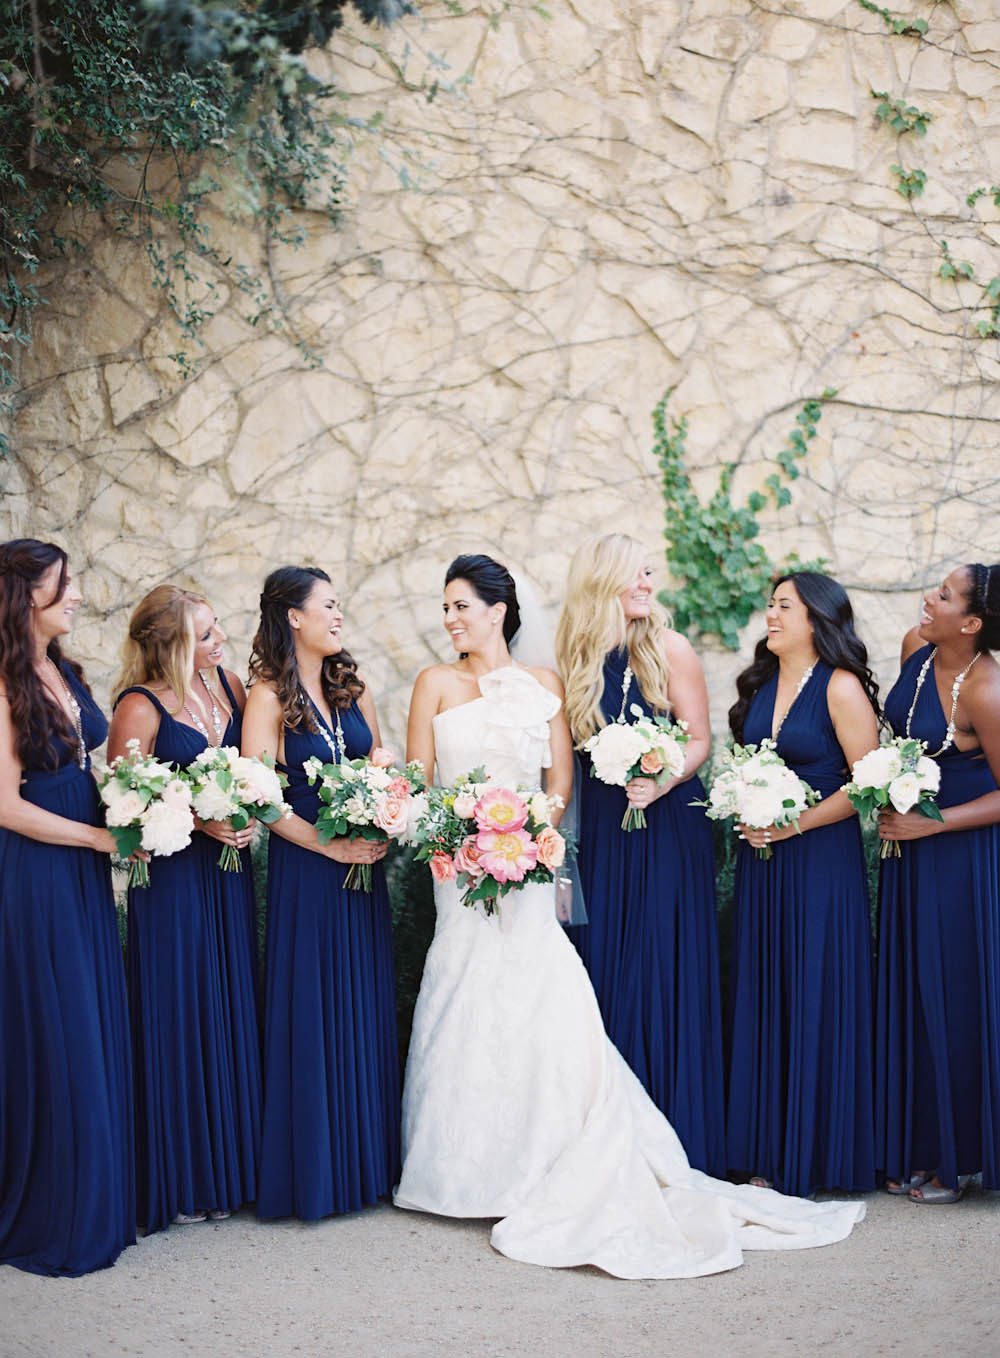 Mix and match bridesmaid dresses on the navy blue color - one shoulder and V neck. // Get inspired with this gallery filled with 50+ awesome wedding ideas for your bridesmaids, including dresses, proposals & more. // mysweetengagement.com